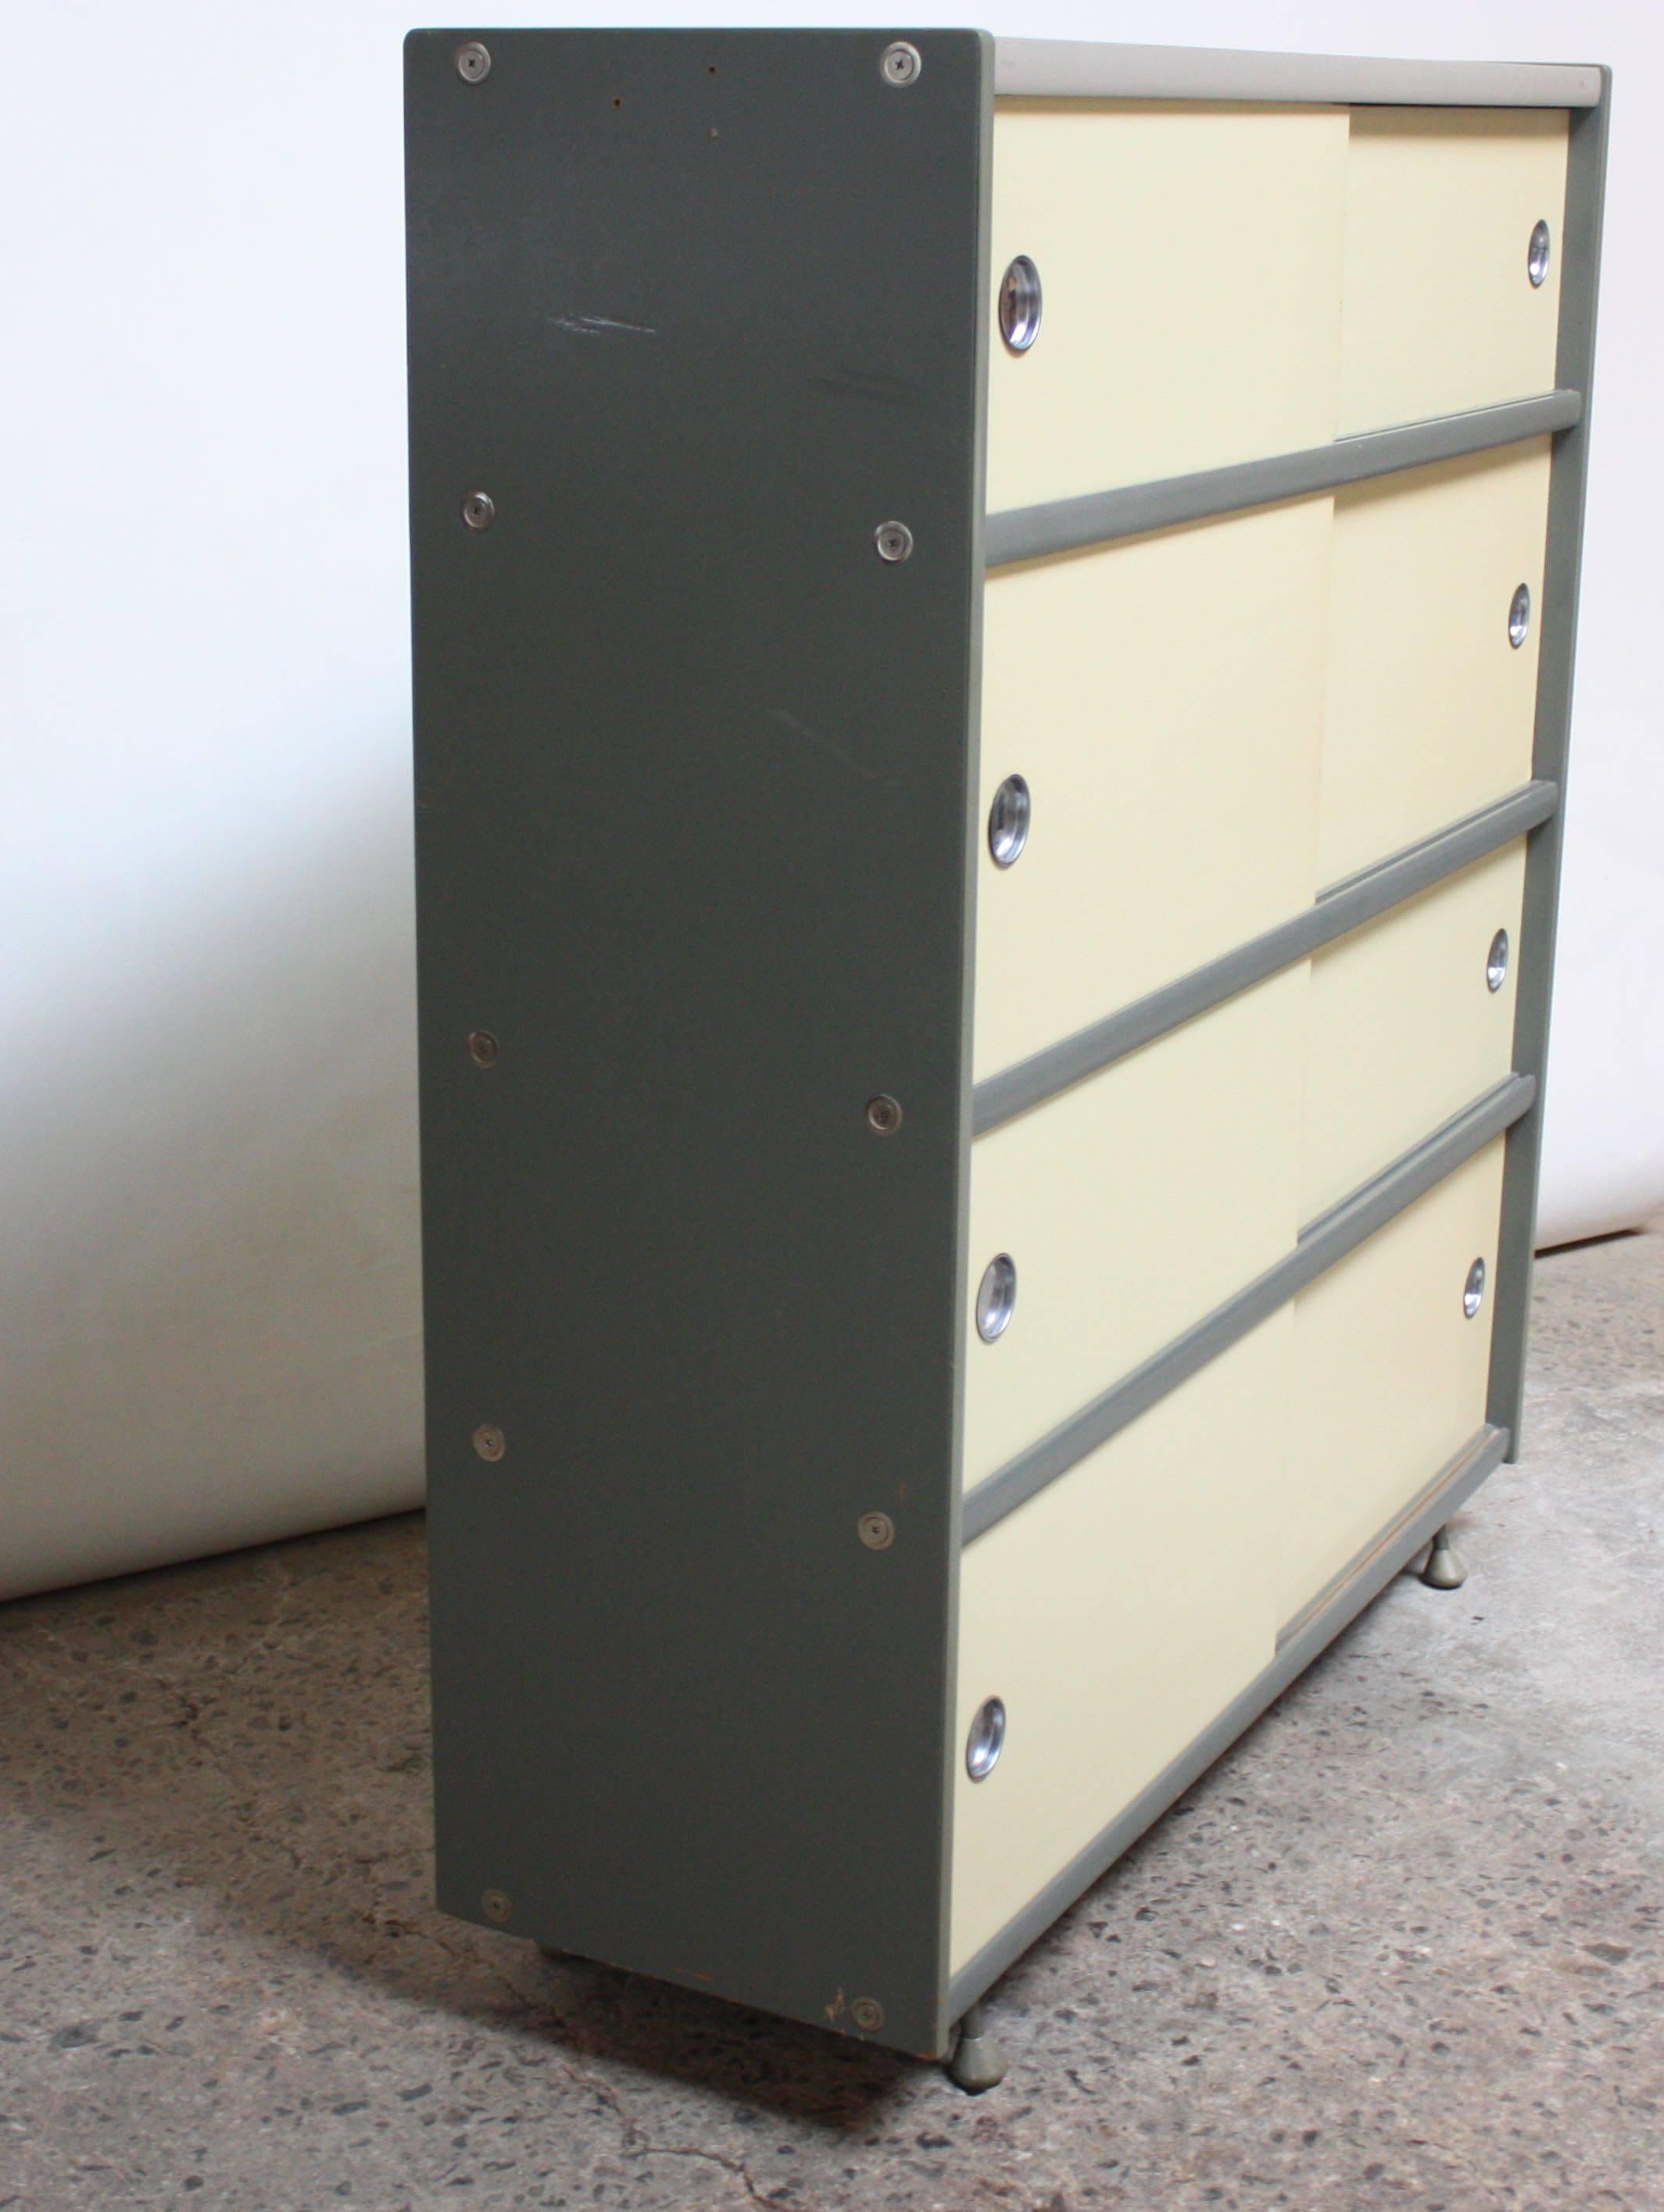 This Bauhaus-style storage cabinet is a rare example from Brunswick, scarcely seen in its original finish. Although it is often attributed to Raymond Loewy, Bill Renwick actually designed this unit in the 1950s. It is composed of a painted gray